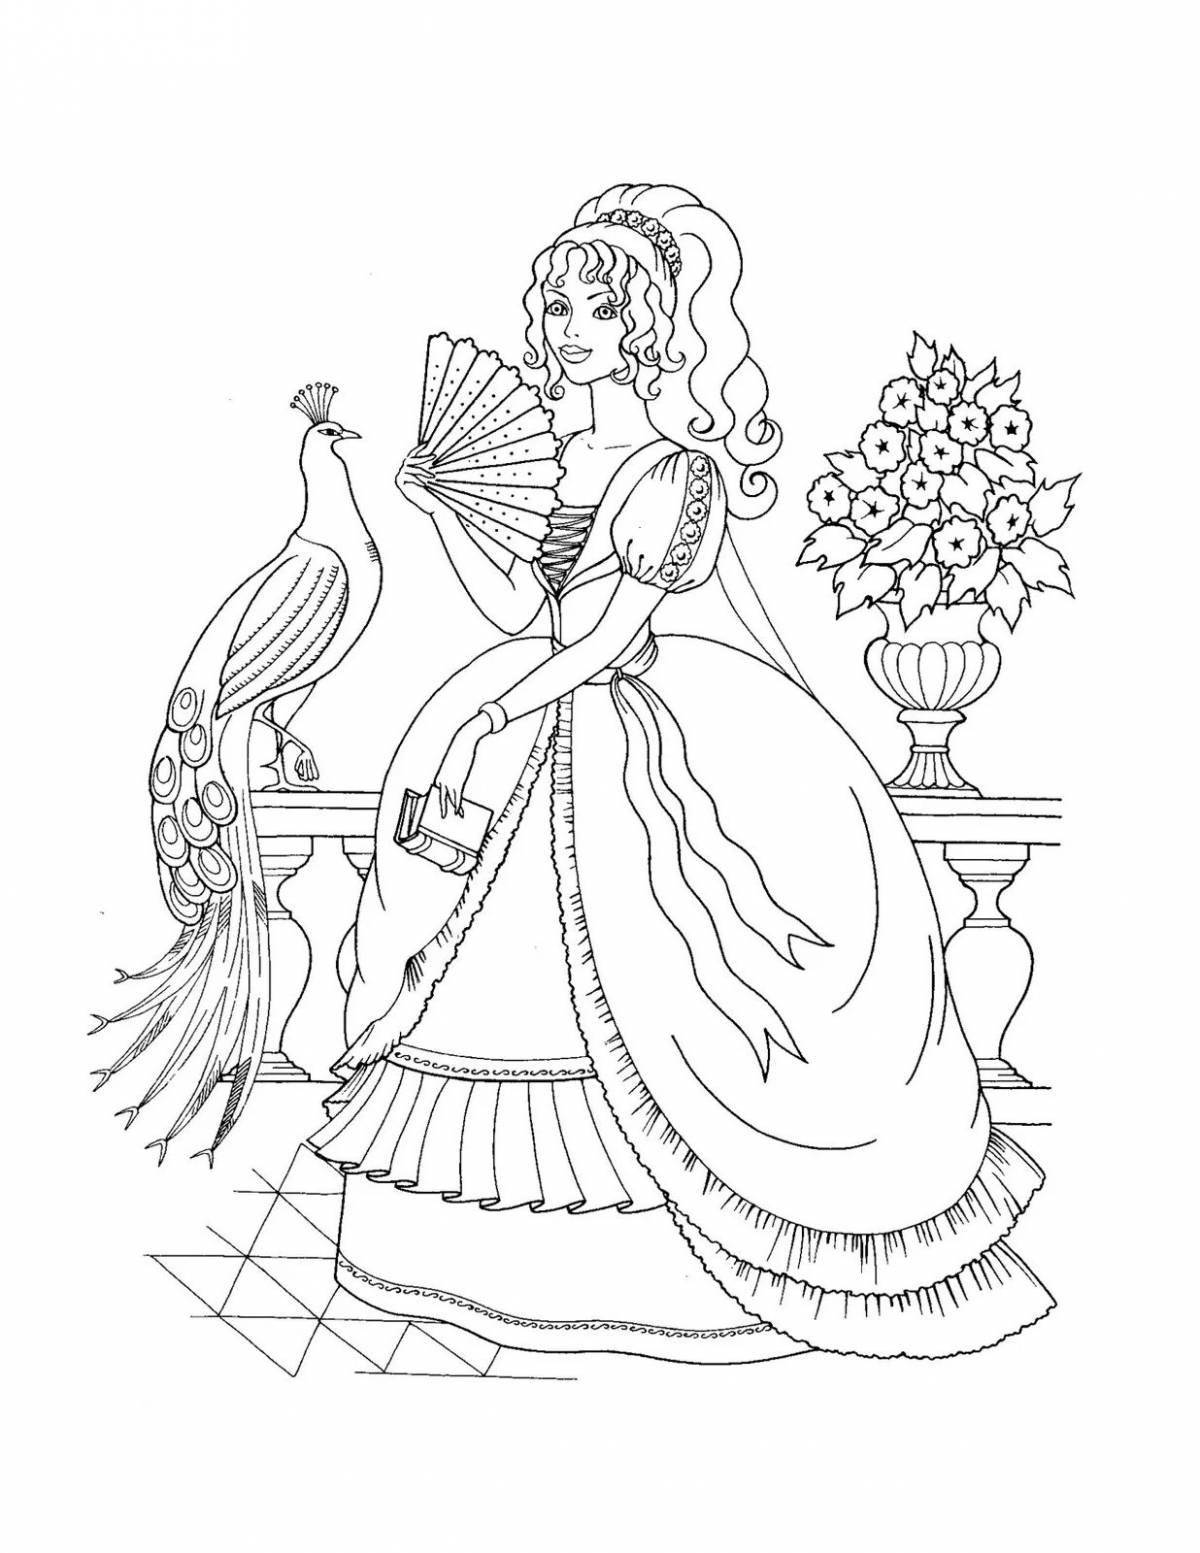 Glorious queen coloring page